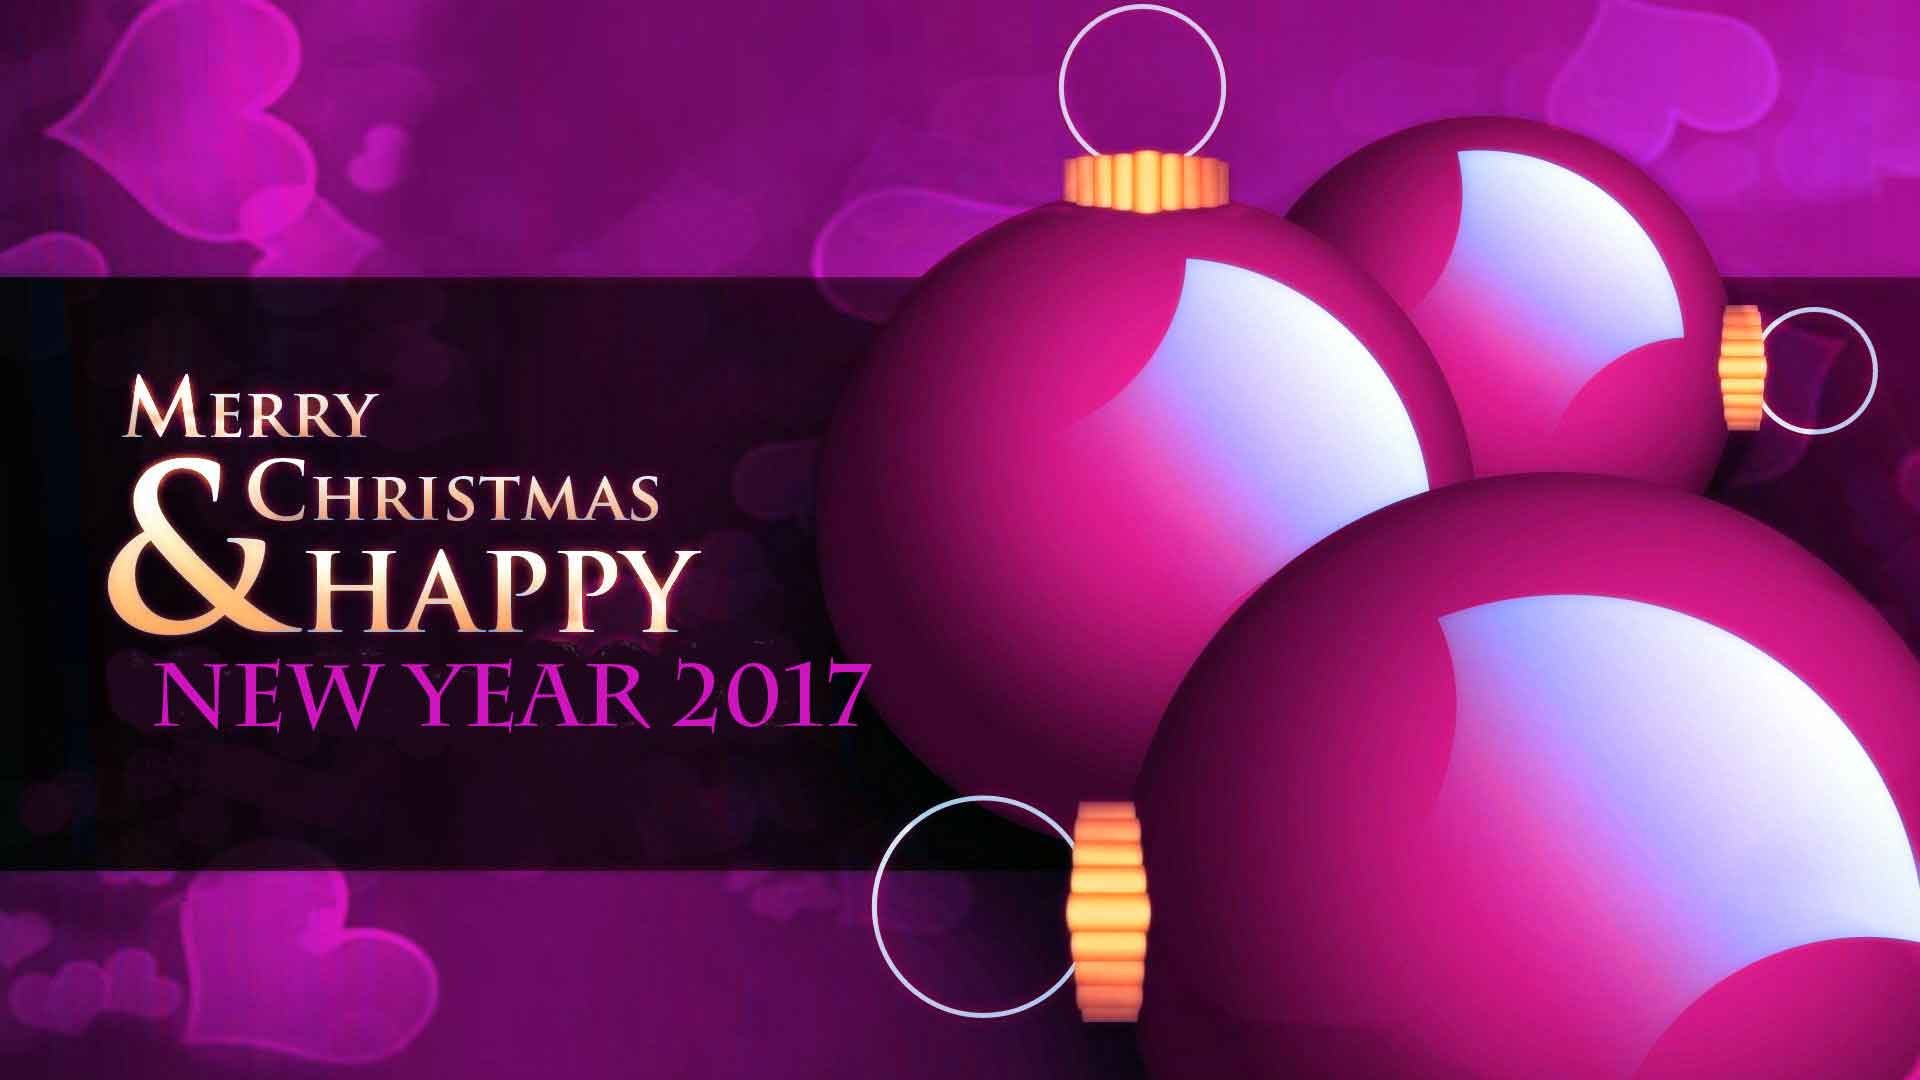 Happy New Year 2017 HD Wallpaper · Download · A High Quality wallpaper themed on